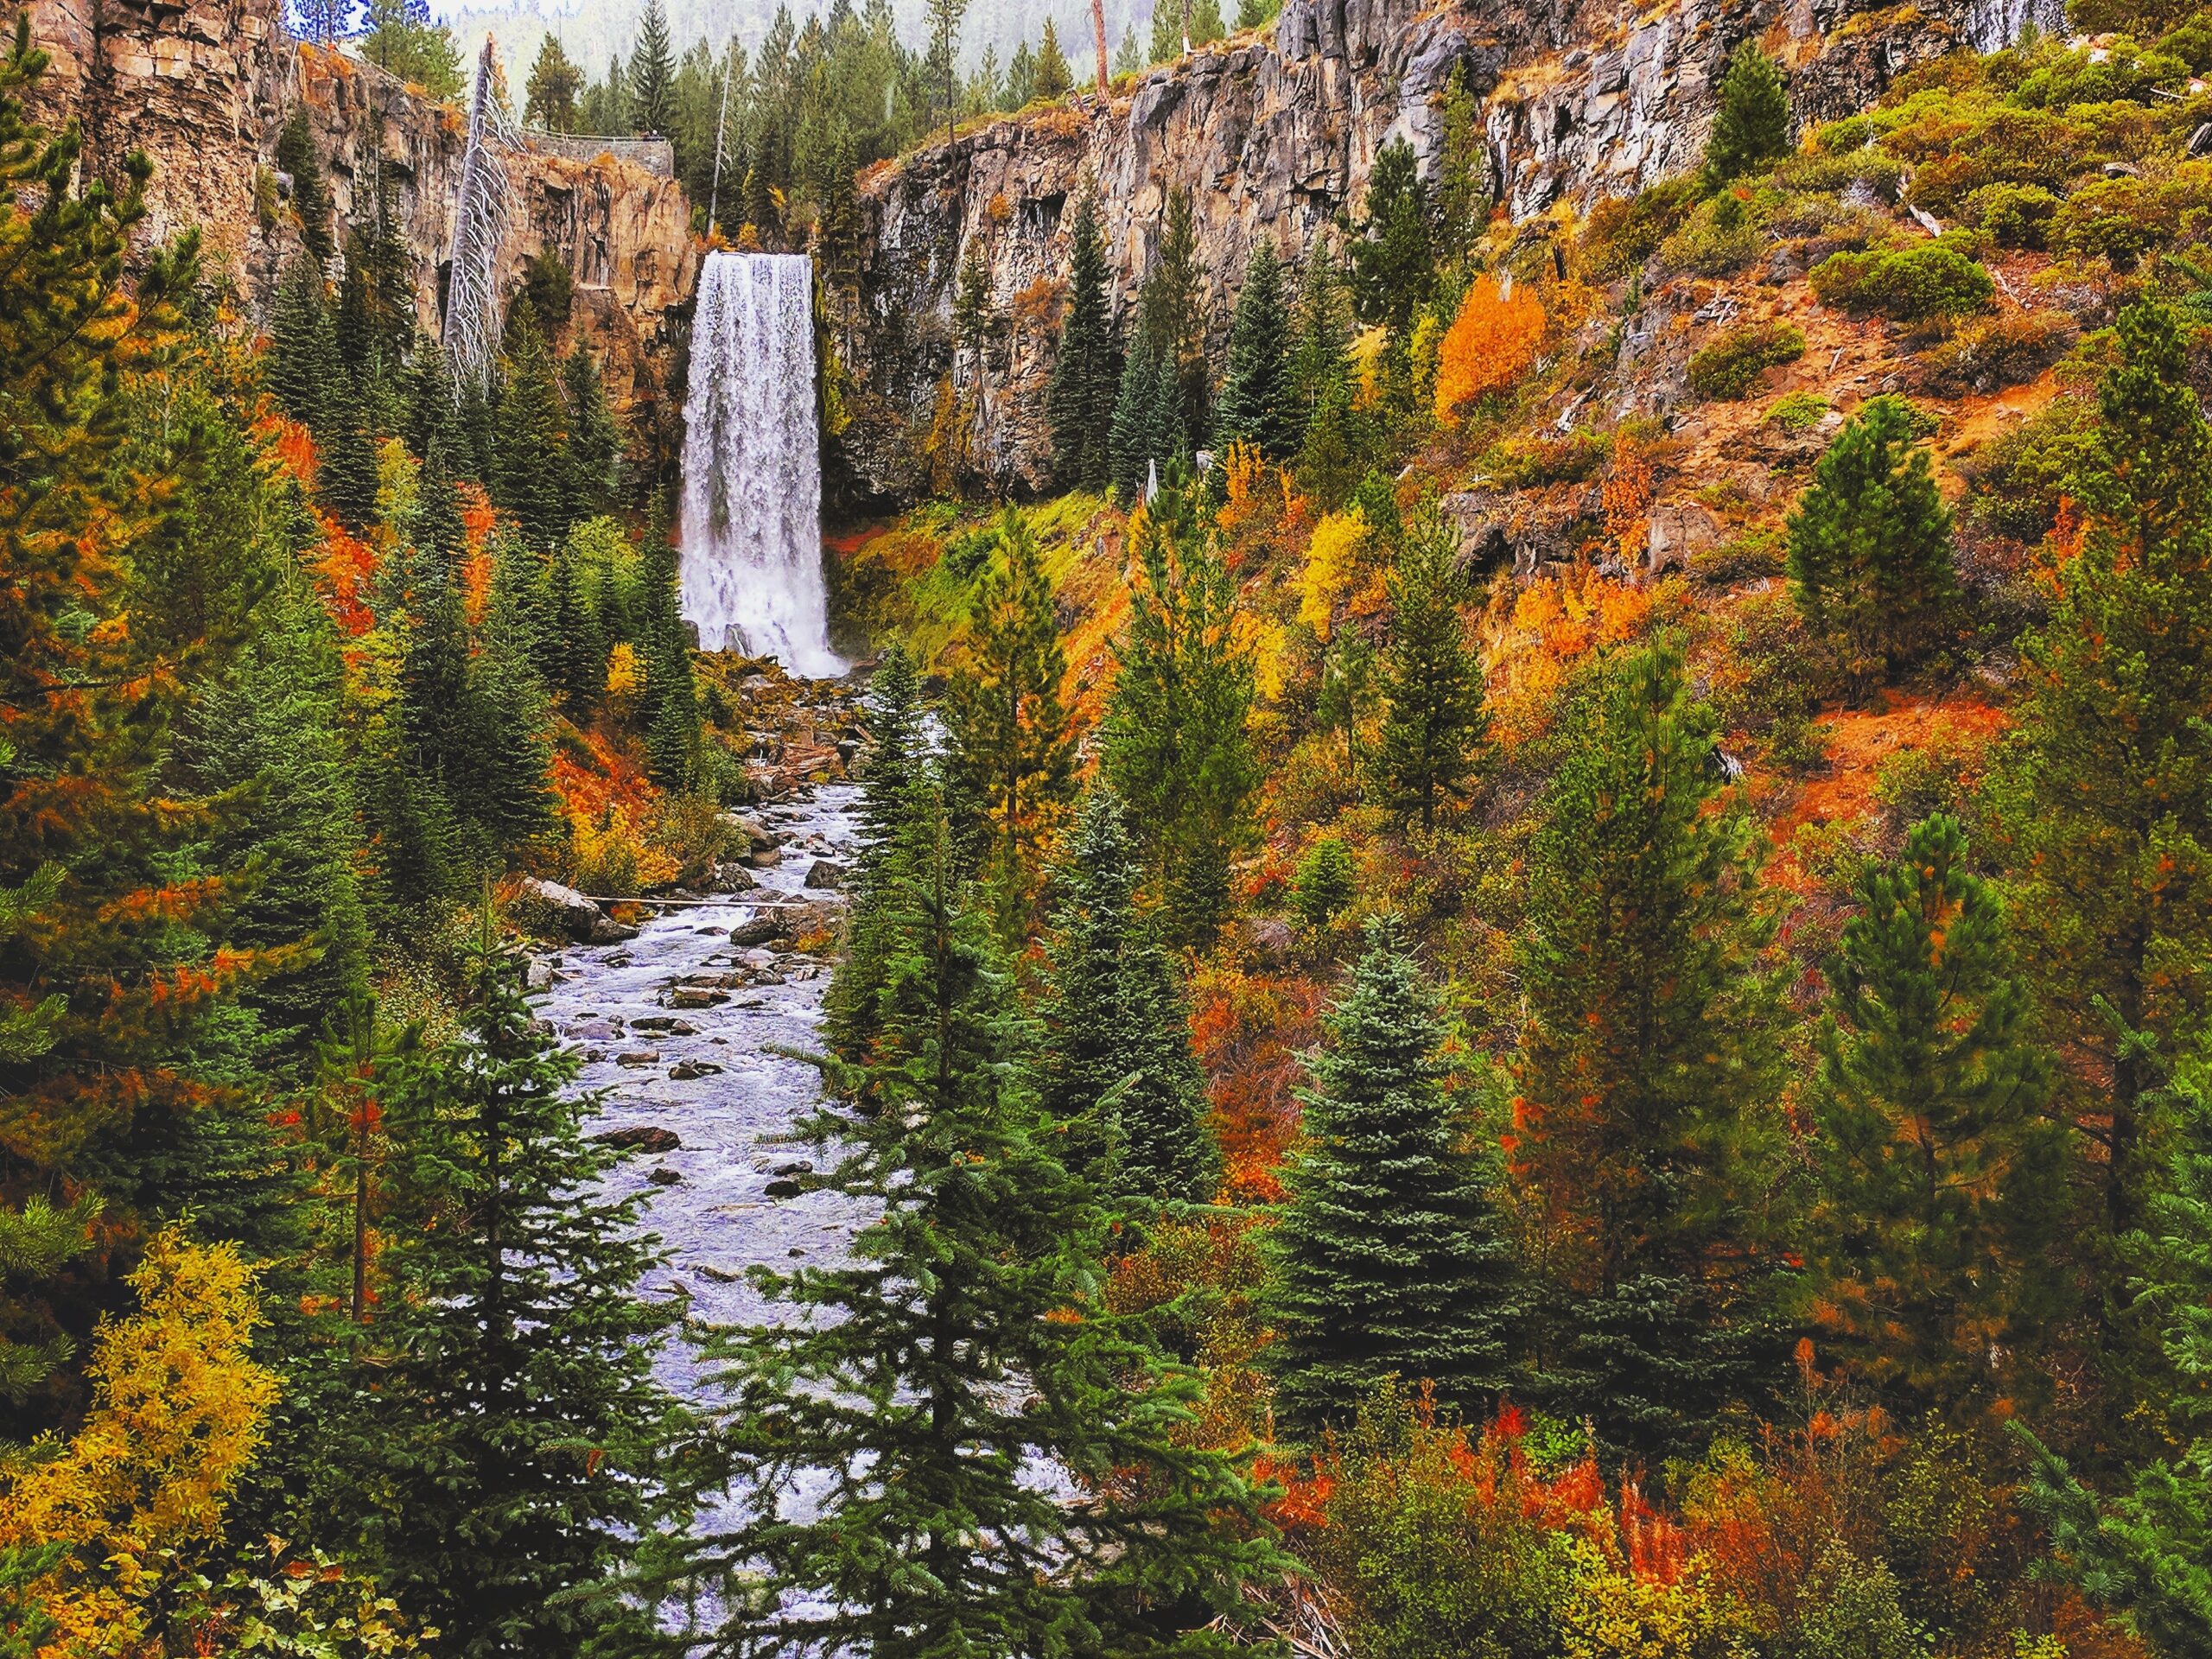 Tumalo Falls, a scenic waterfall outside of Bend, spills over a rocky wall into a forested creek below.